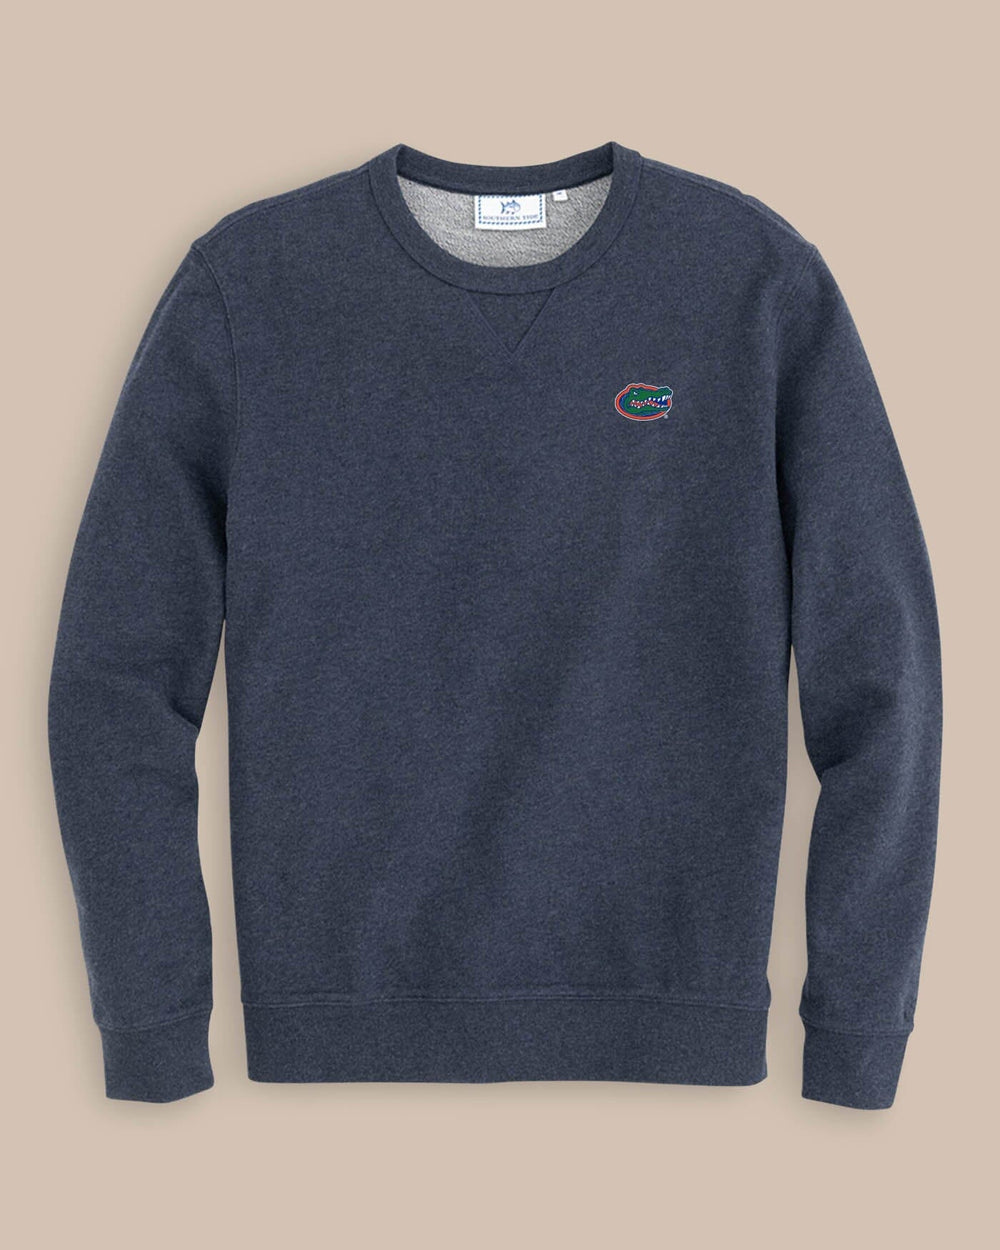 The front view of the Men's Grey Florida Gators Upper Deck Pullover Sweatshirt by Southern Tide - Heather Navy